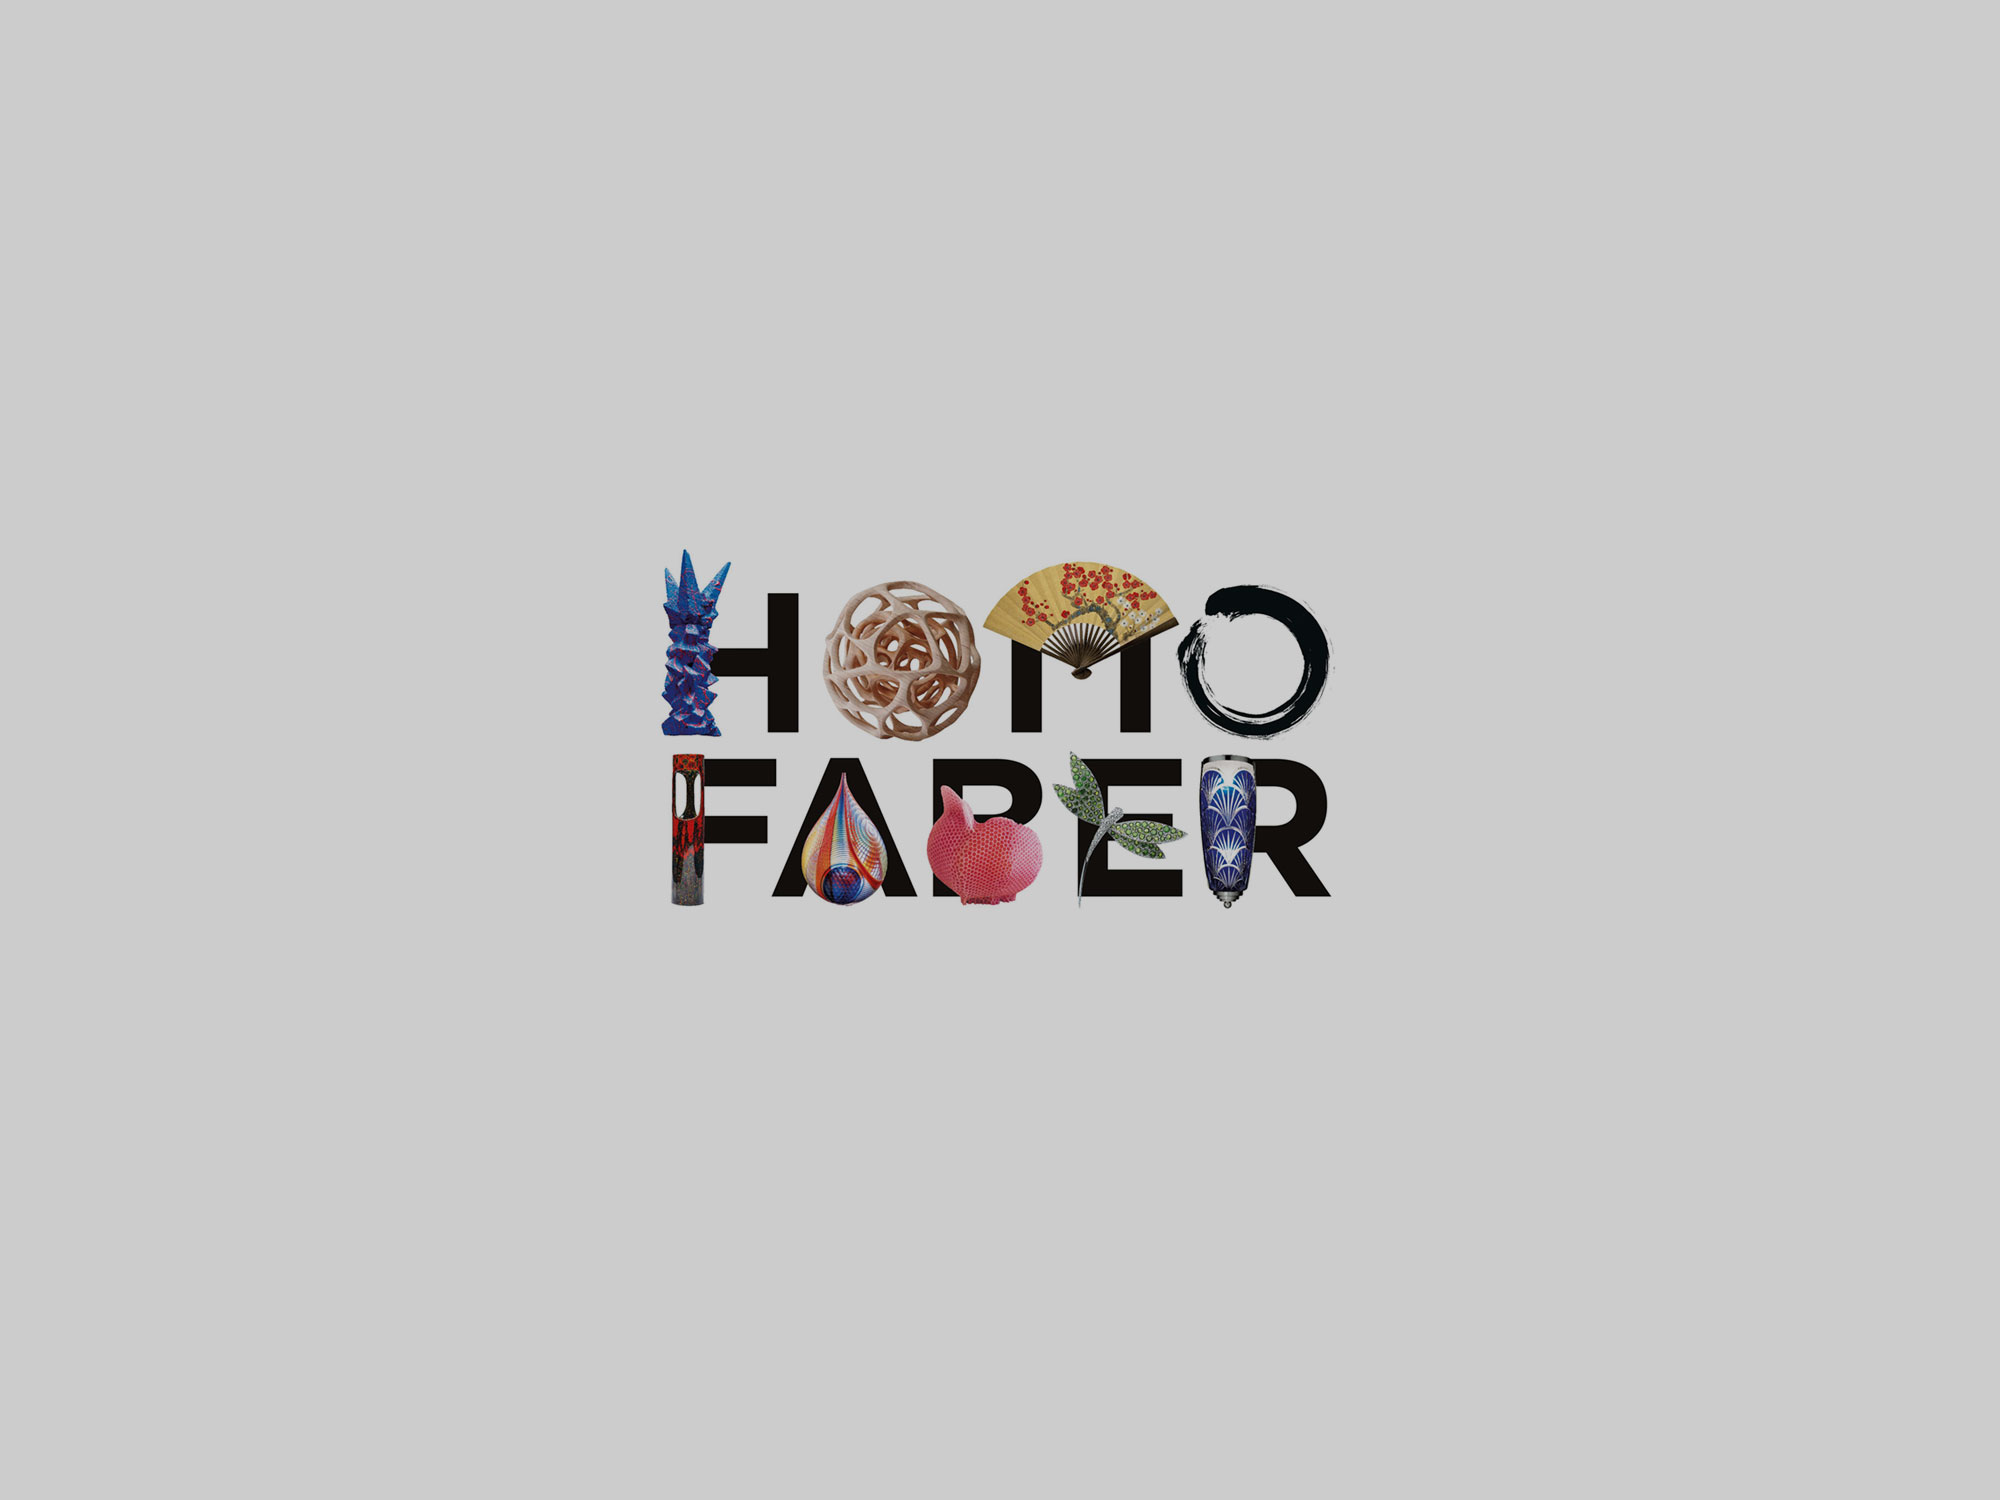 The creation of Homo Faber, crafting a more human future.